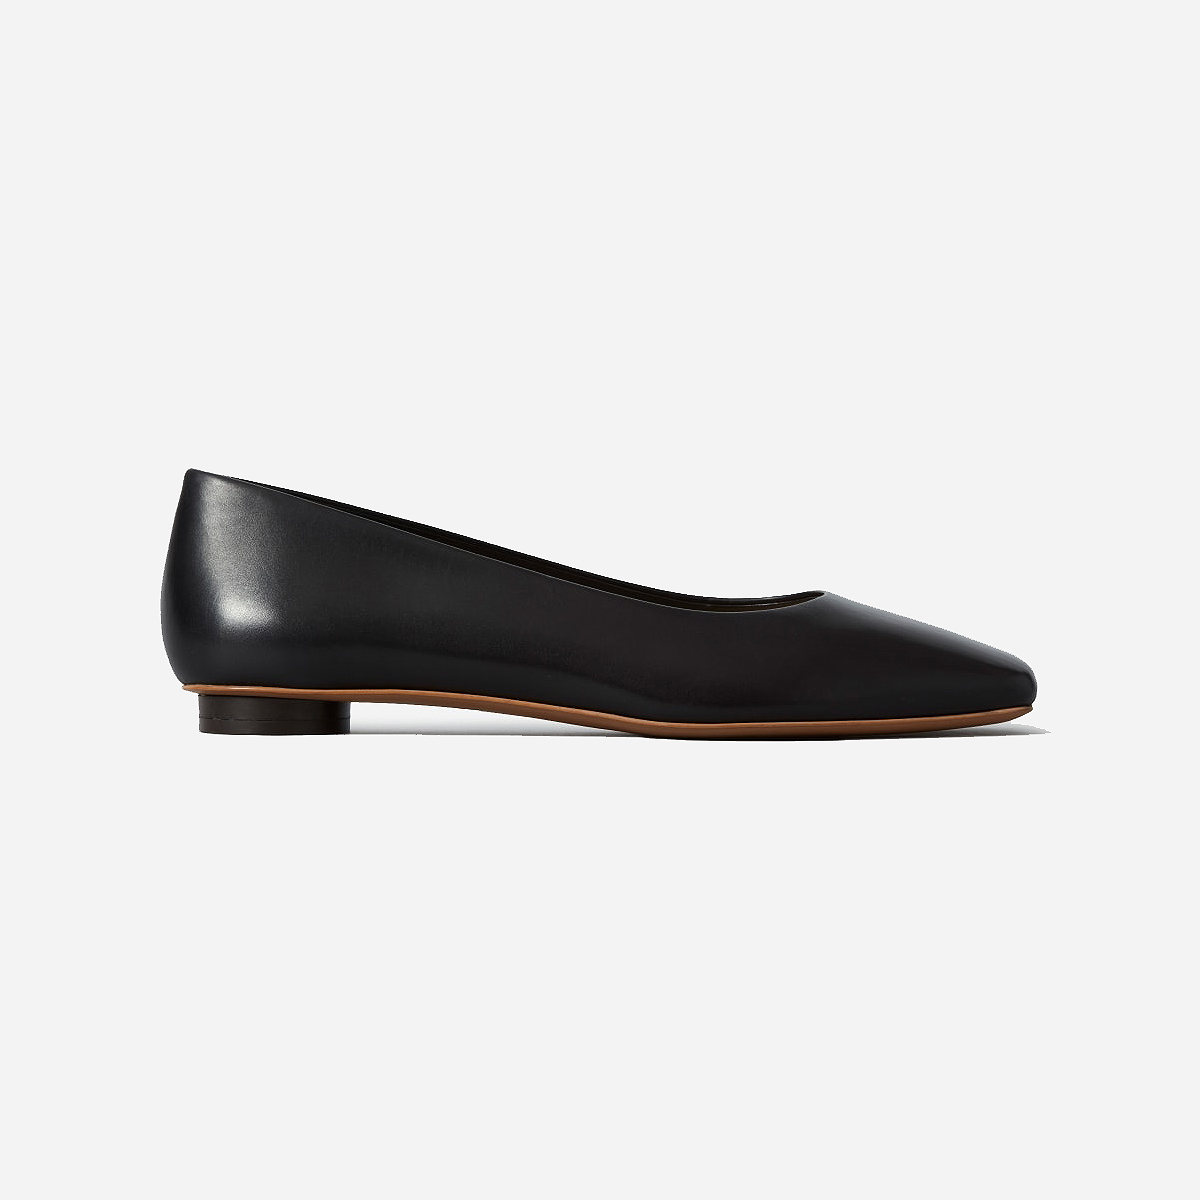 Oh My Shoe Sale — Everlane’s Top-Rated ’90s Flat Is 50% Off | Us Weekly